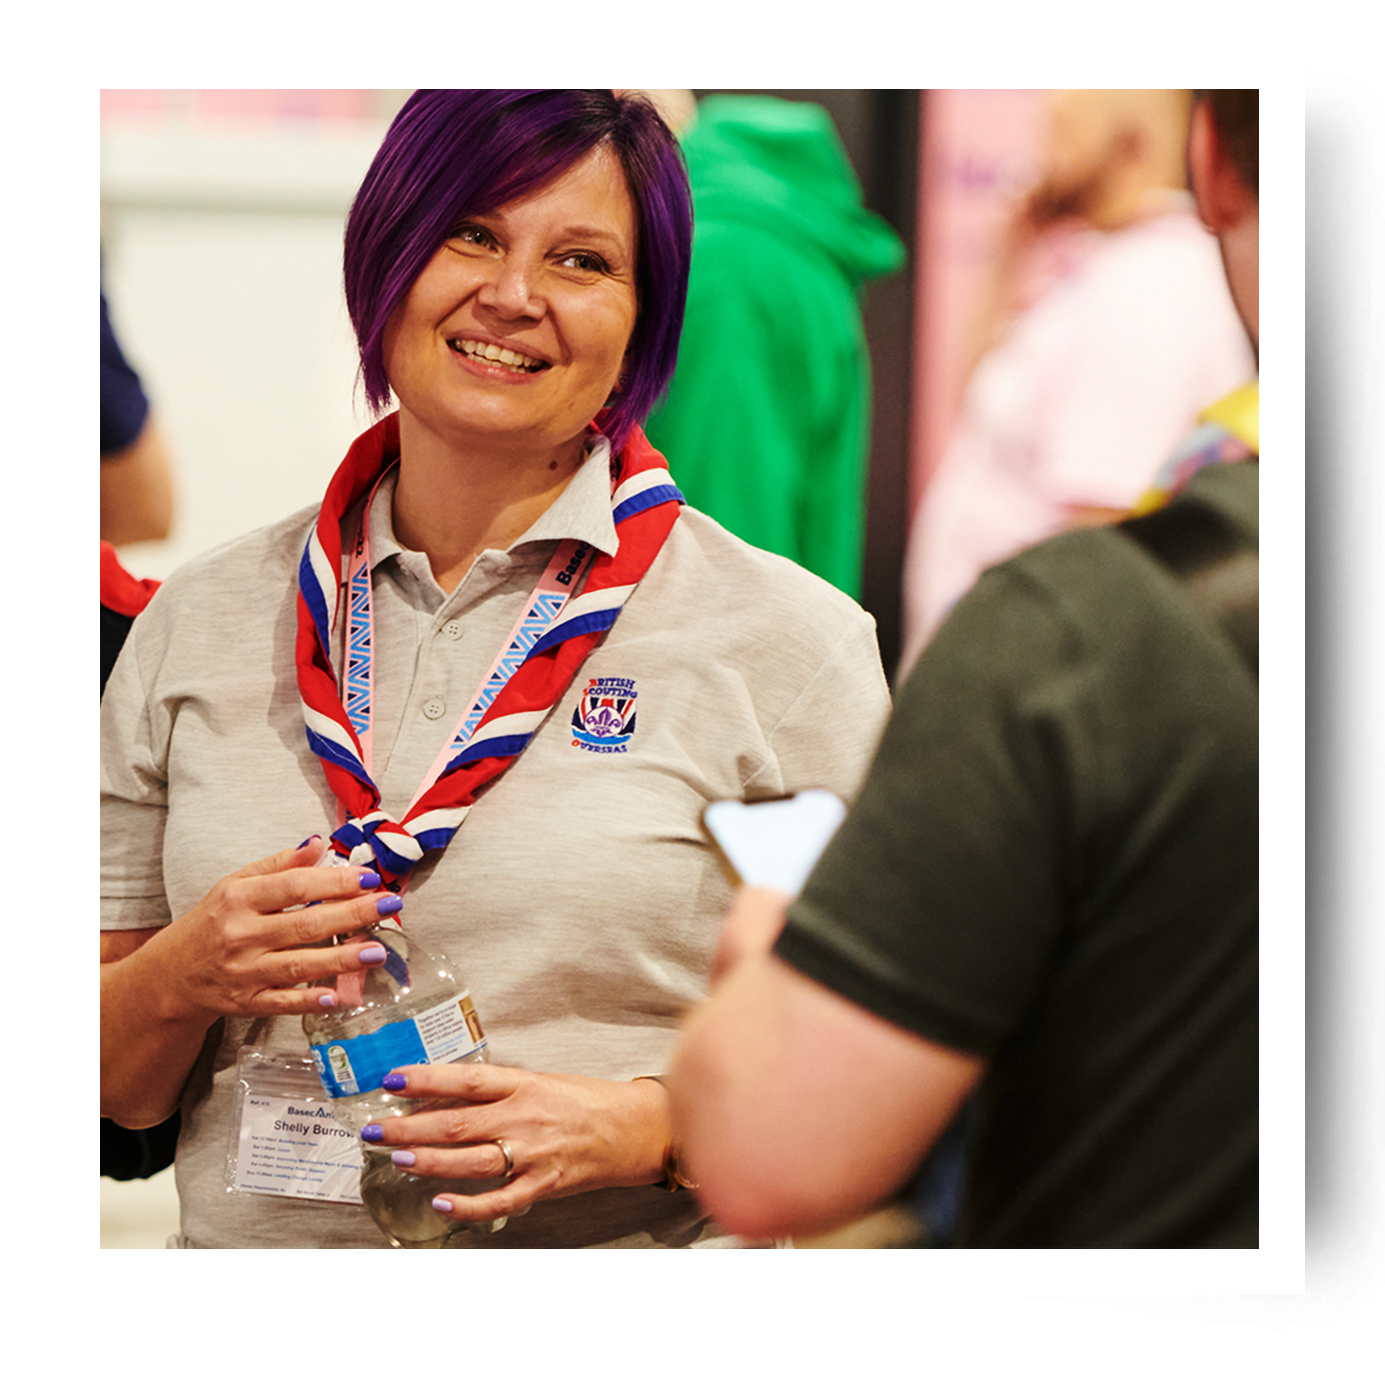 A volunteer with short purple hair is looking at another volunteer and smiling. They're wearing their uniform, a lanyard, and a blue, red and white necker.